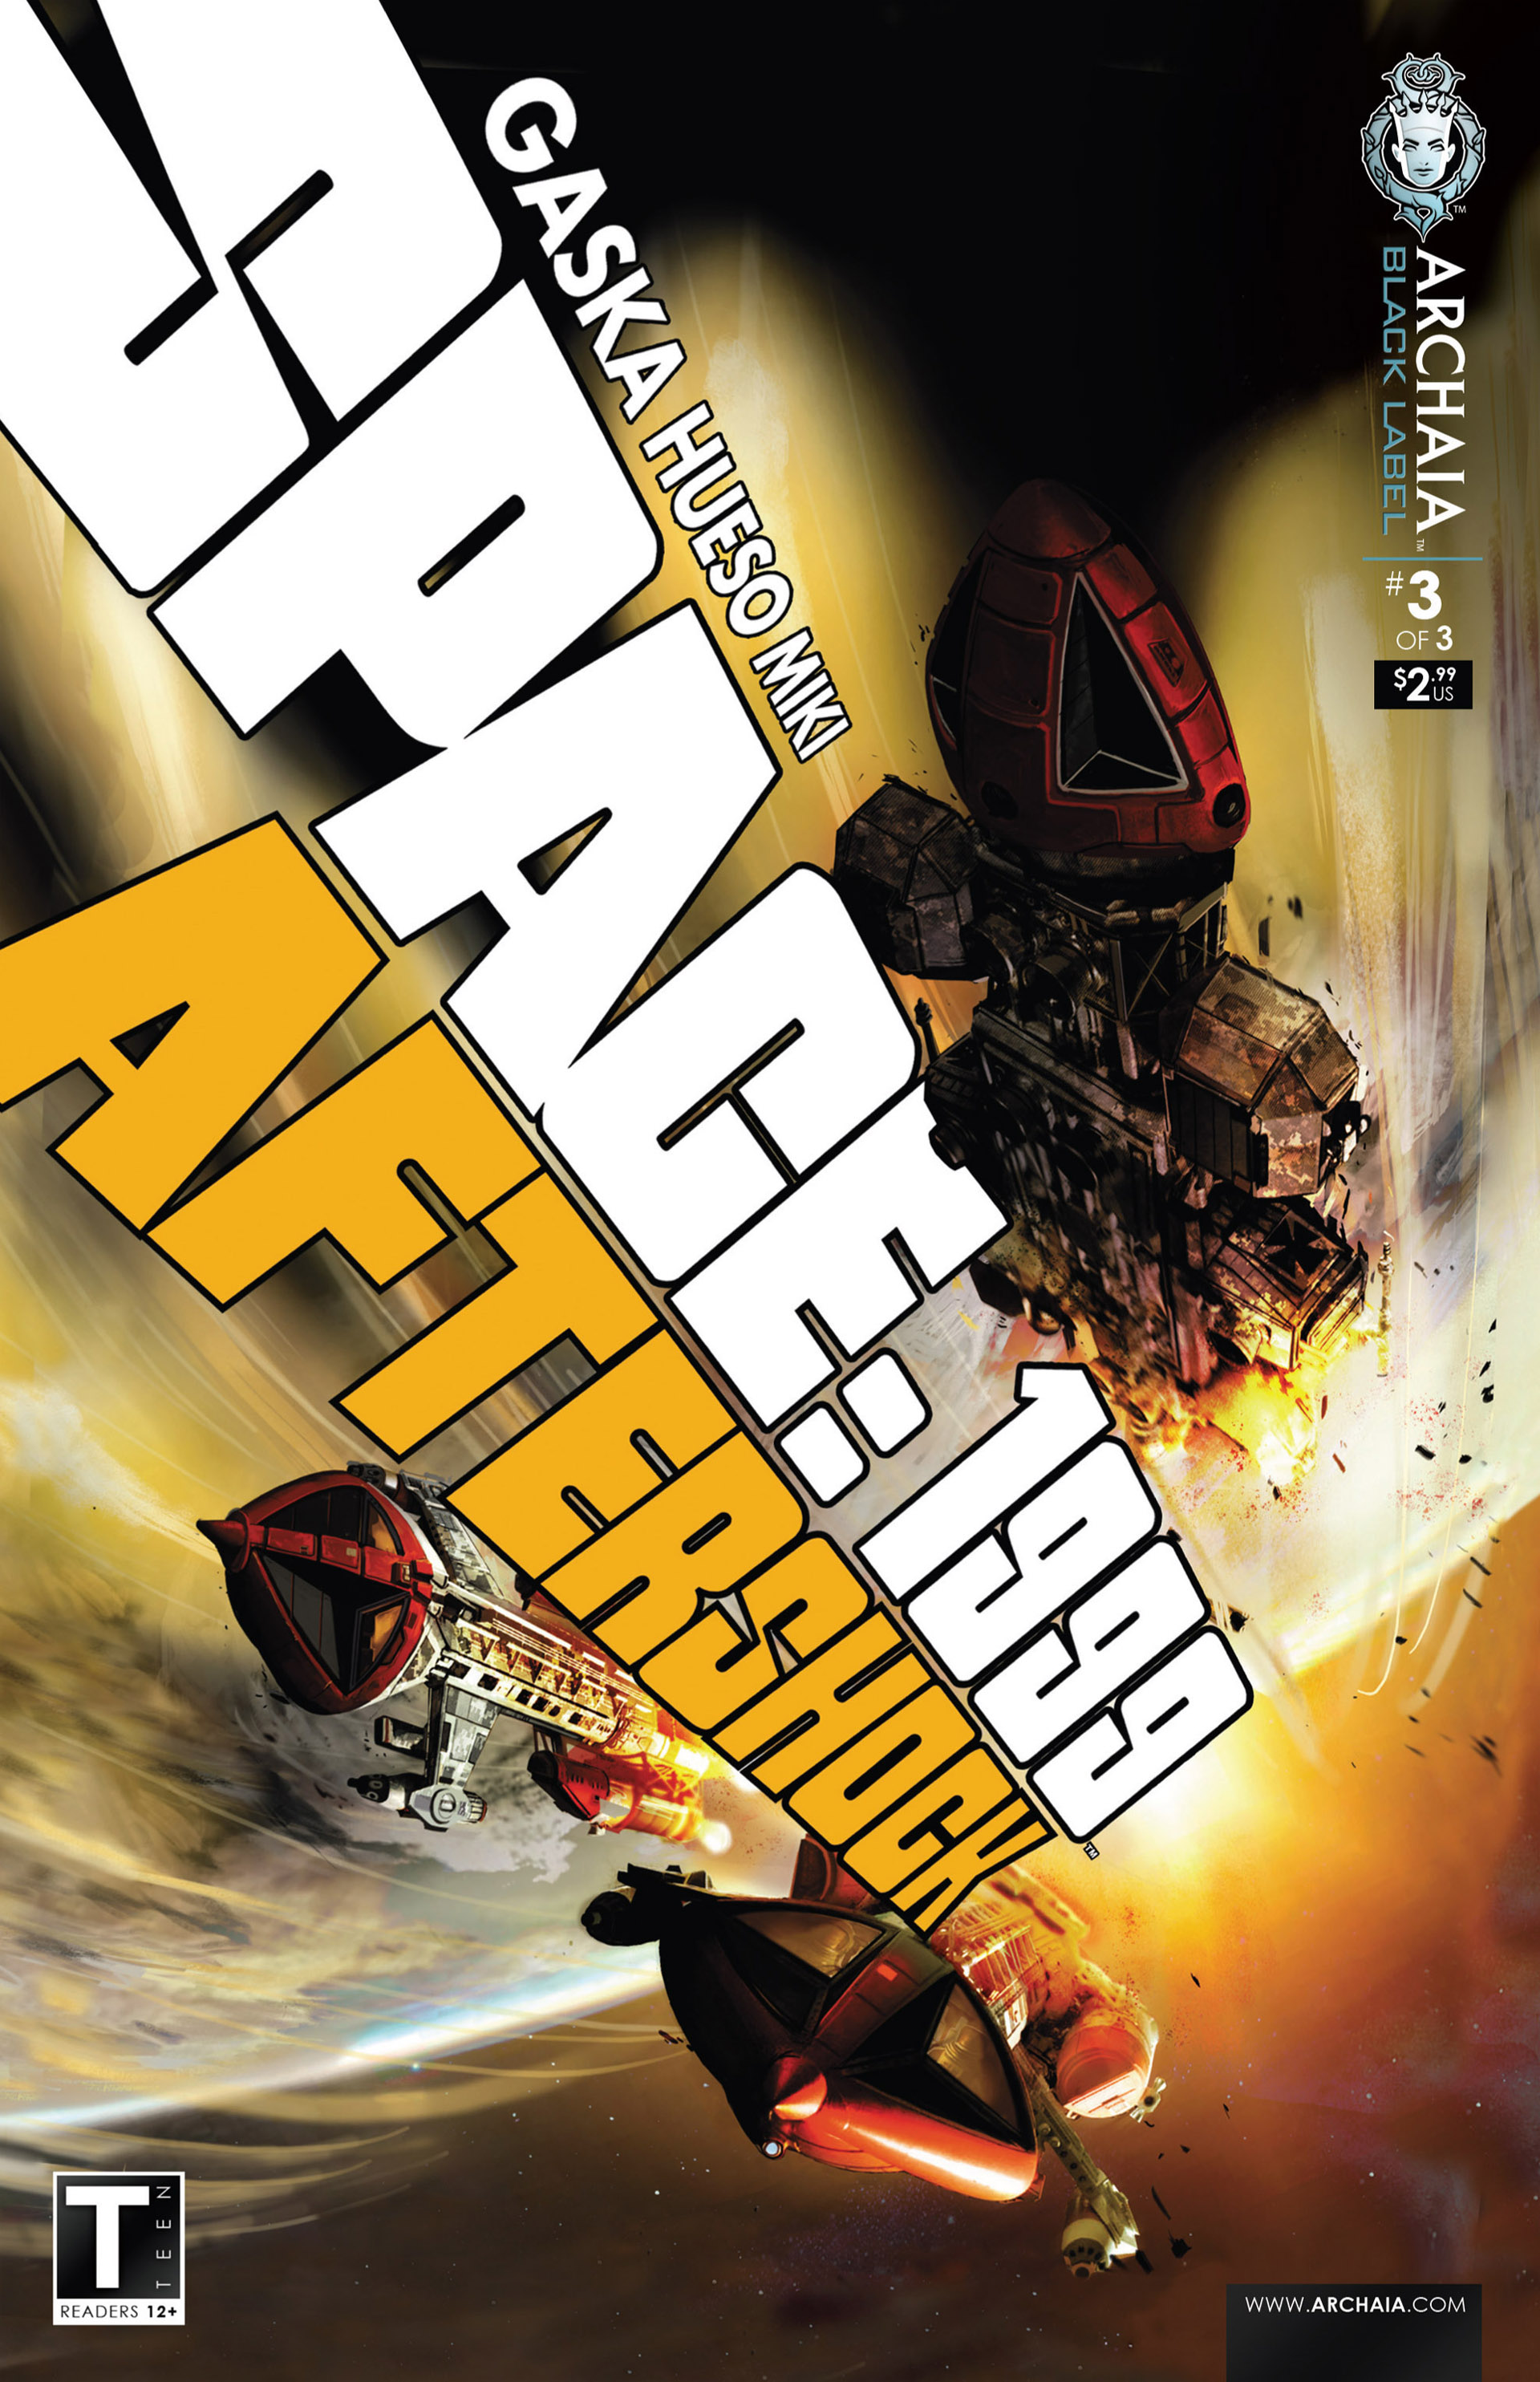 Read online Space: 1999: Aftershock comic -  Issue #3 - 1